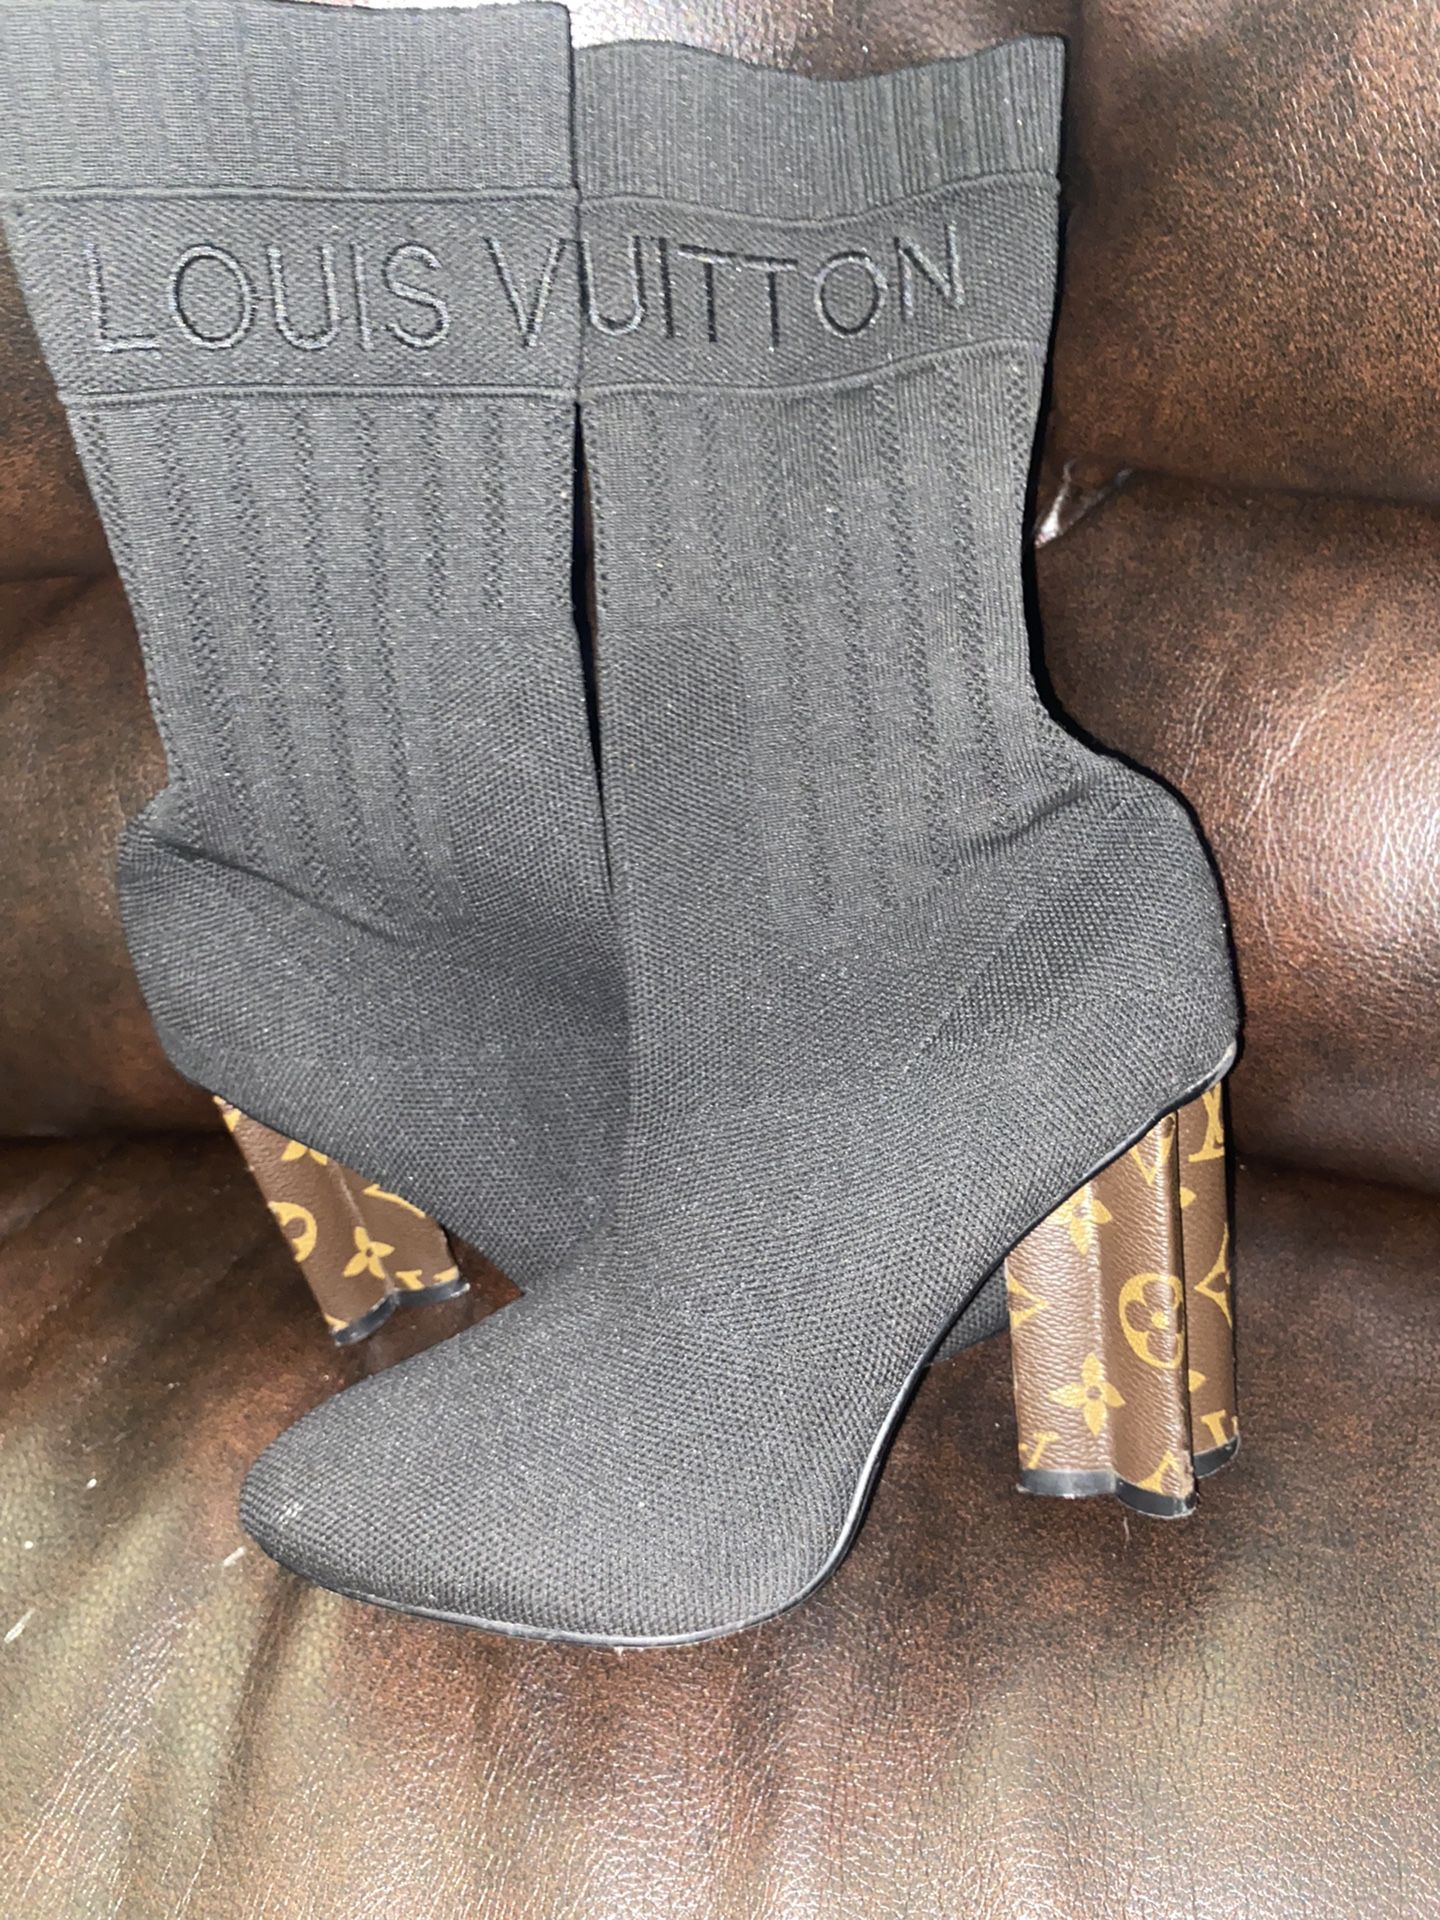 Size 39 Louis Vuitton Silhouette Boots (black) for Sale in Houston